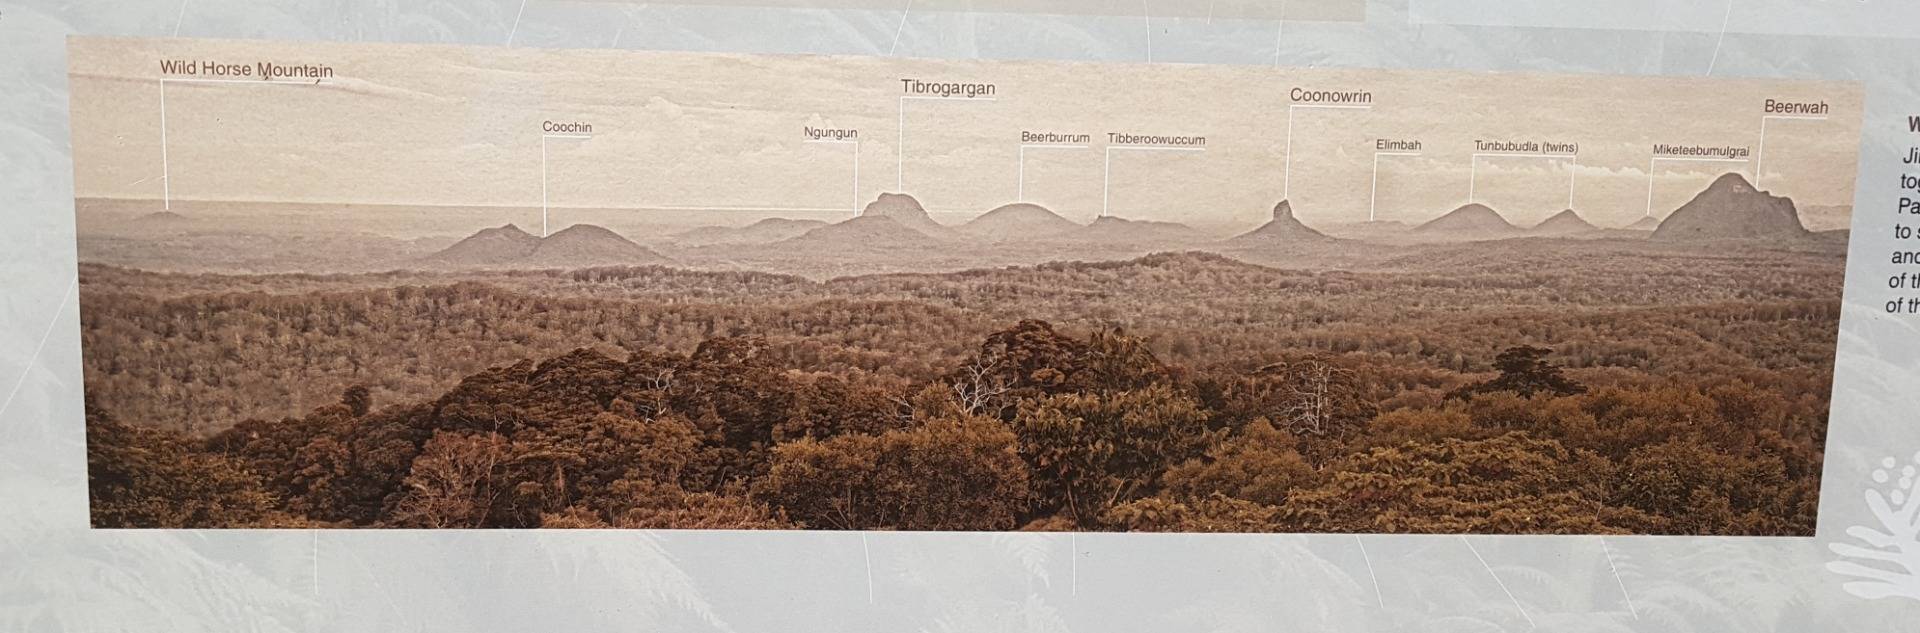 This is a National Parks sign, highlighting the names of each of the Glasshouse Mountains.